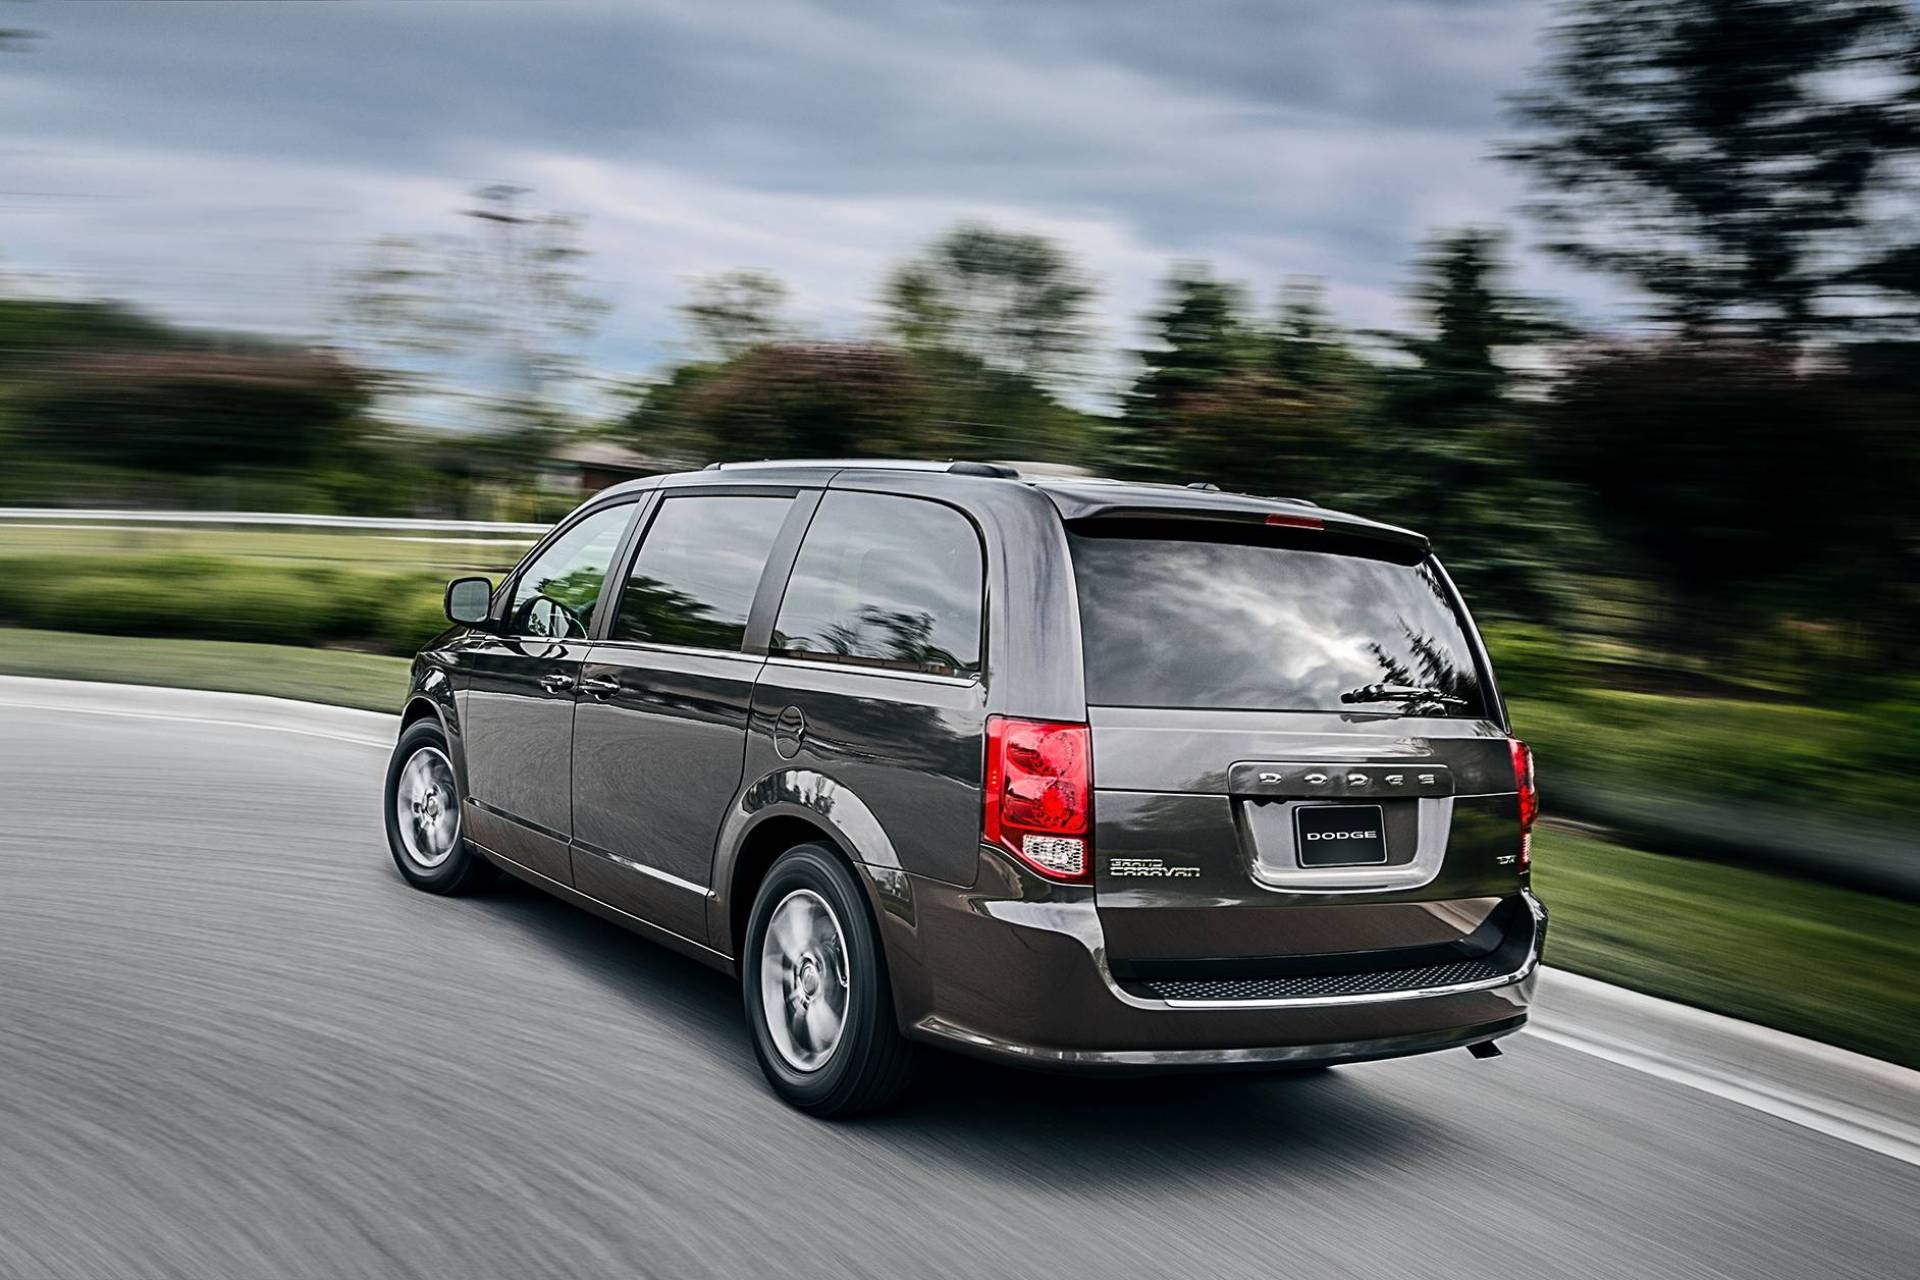 Chrysler Voyager, Stylish and practical, Replacement for Grand Caravan, Latest model, 1920x1280 HD Desktop